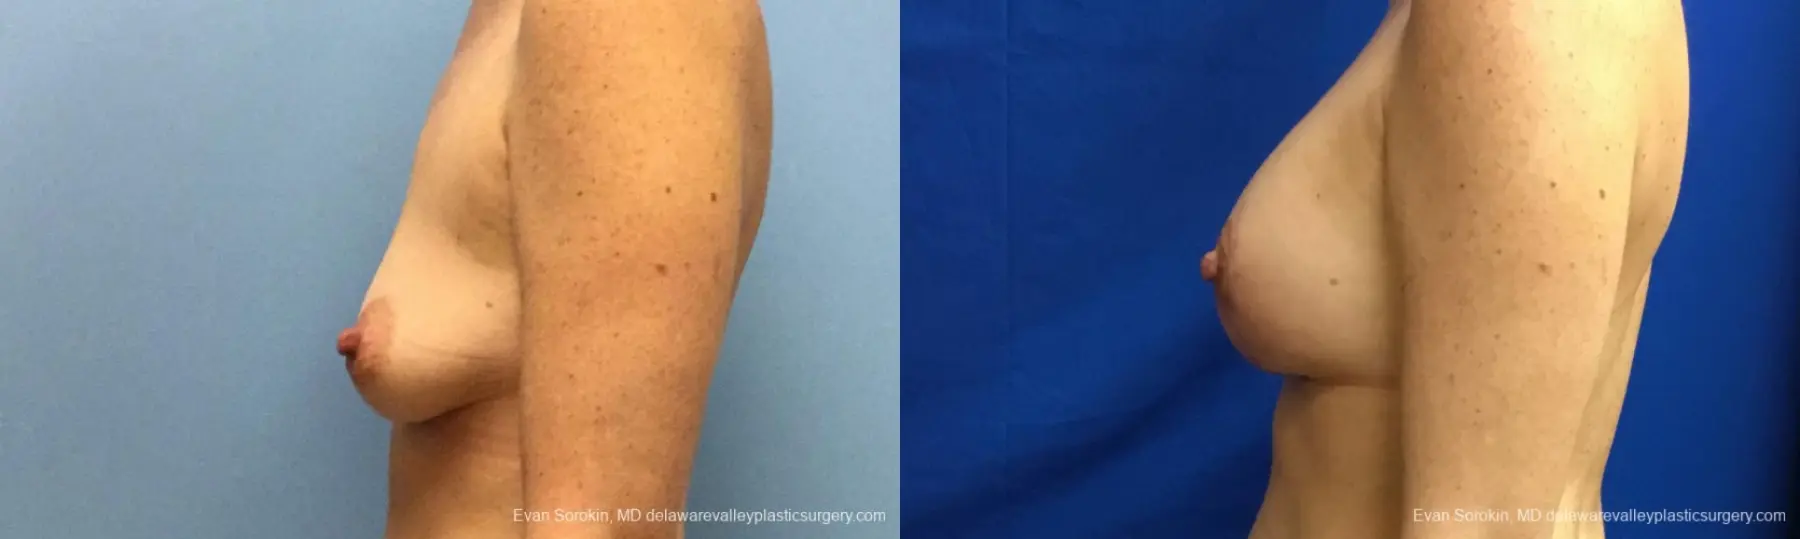 Philadelphia Breast Lift and Augmentation 10814 - Before and After 5